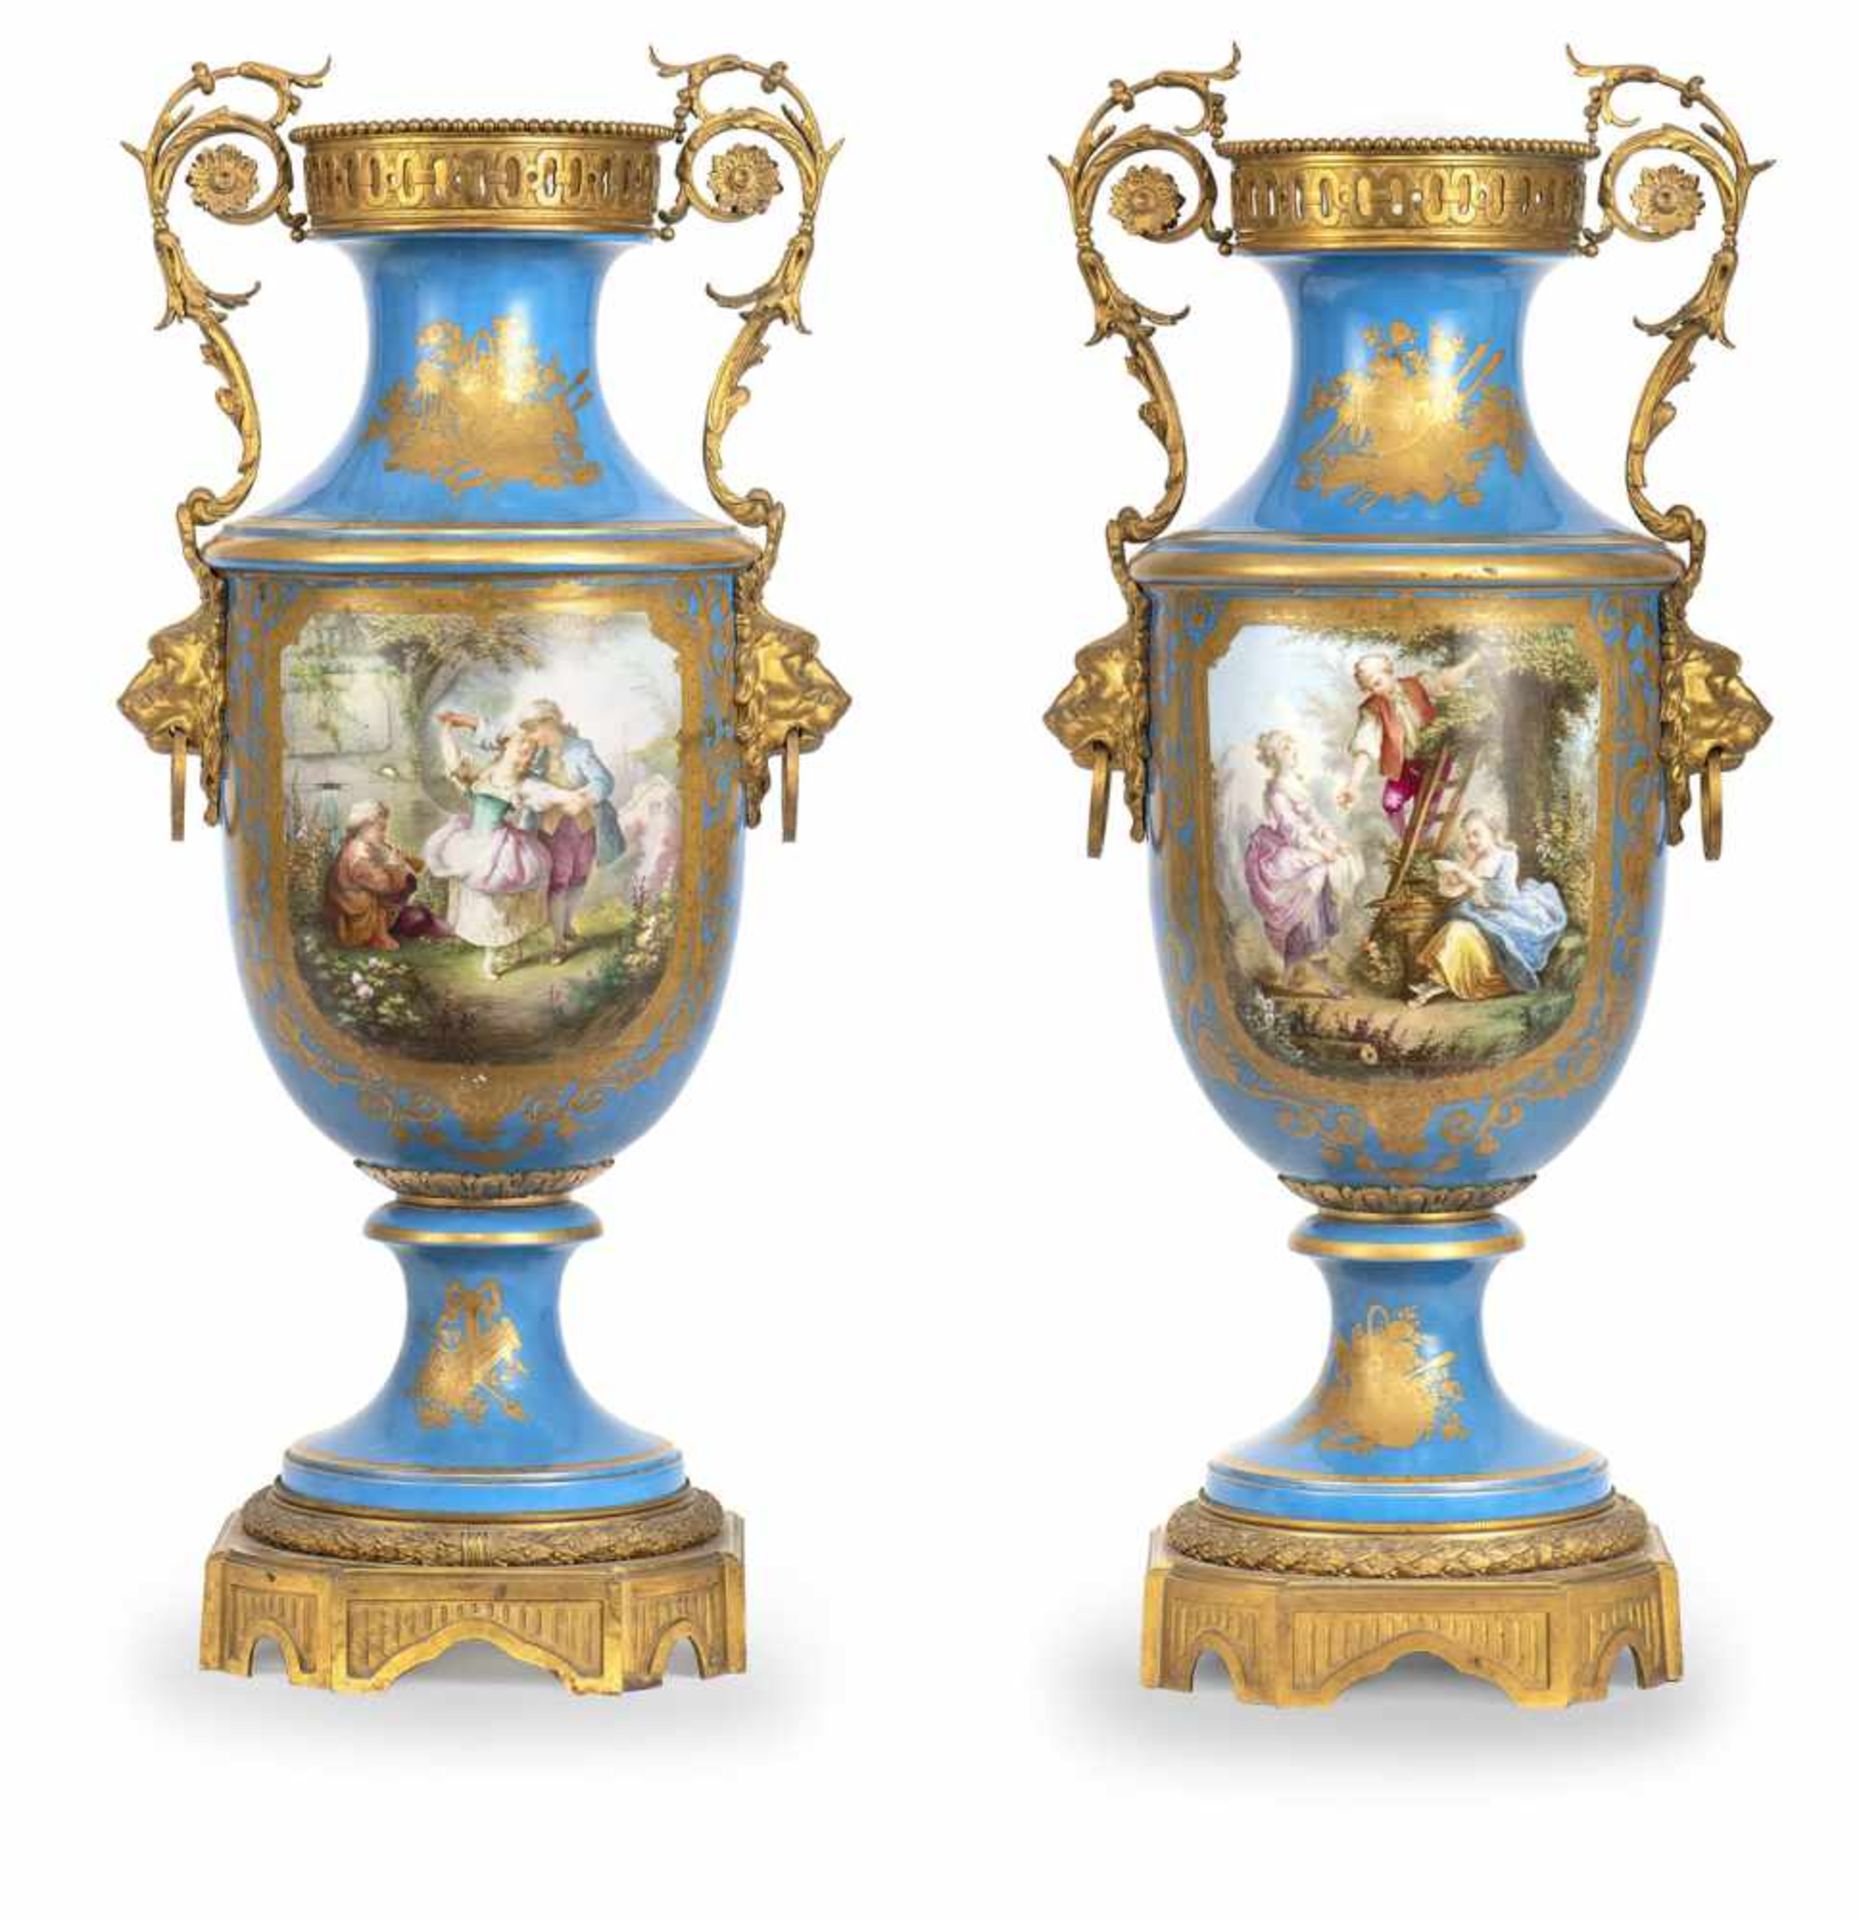 A PAIR OF BIG FRENCH/SEVRES BRONZE MOUNTED PORCELAIN VASES, middle of 19th century. Blue celeste - Bild 2 aus 2